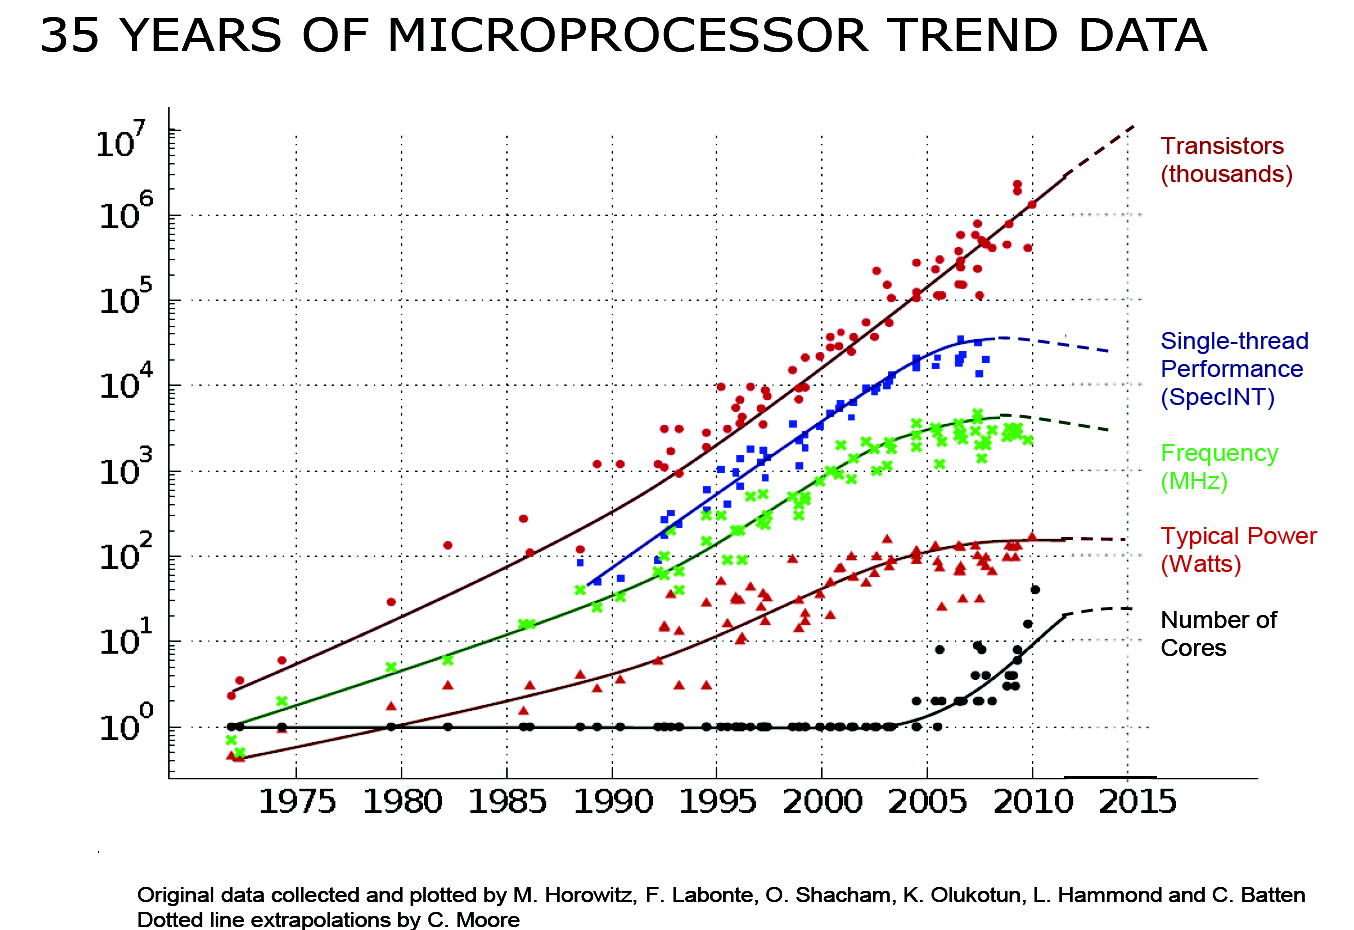 35 Years of Microprocessor Trend Data (Source: https://www.karlrupp.net/2015/06/40-years-of-microprocessor-trend-data/)